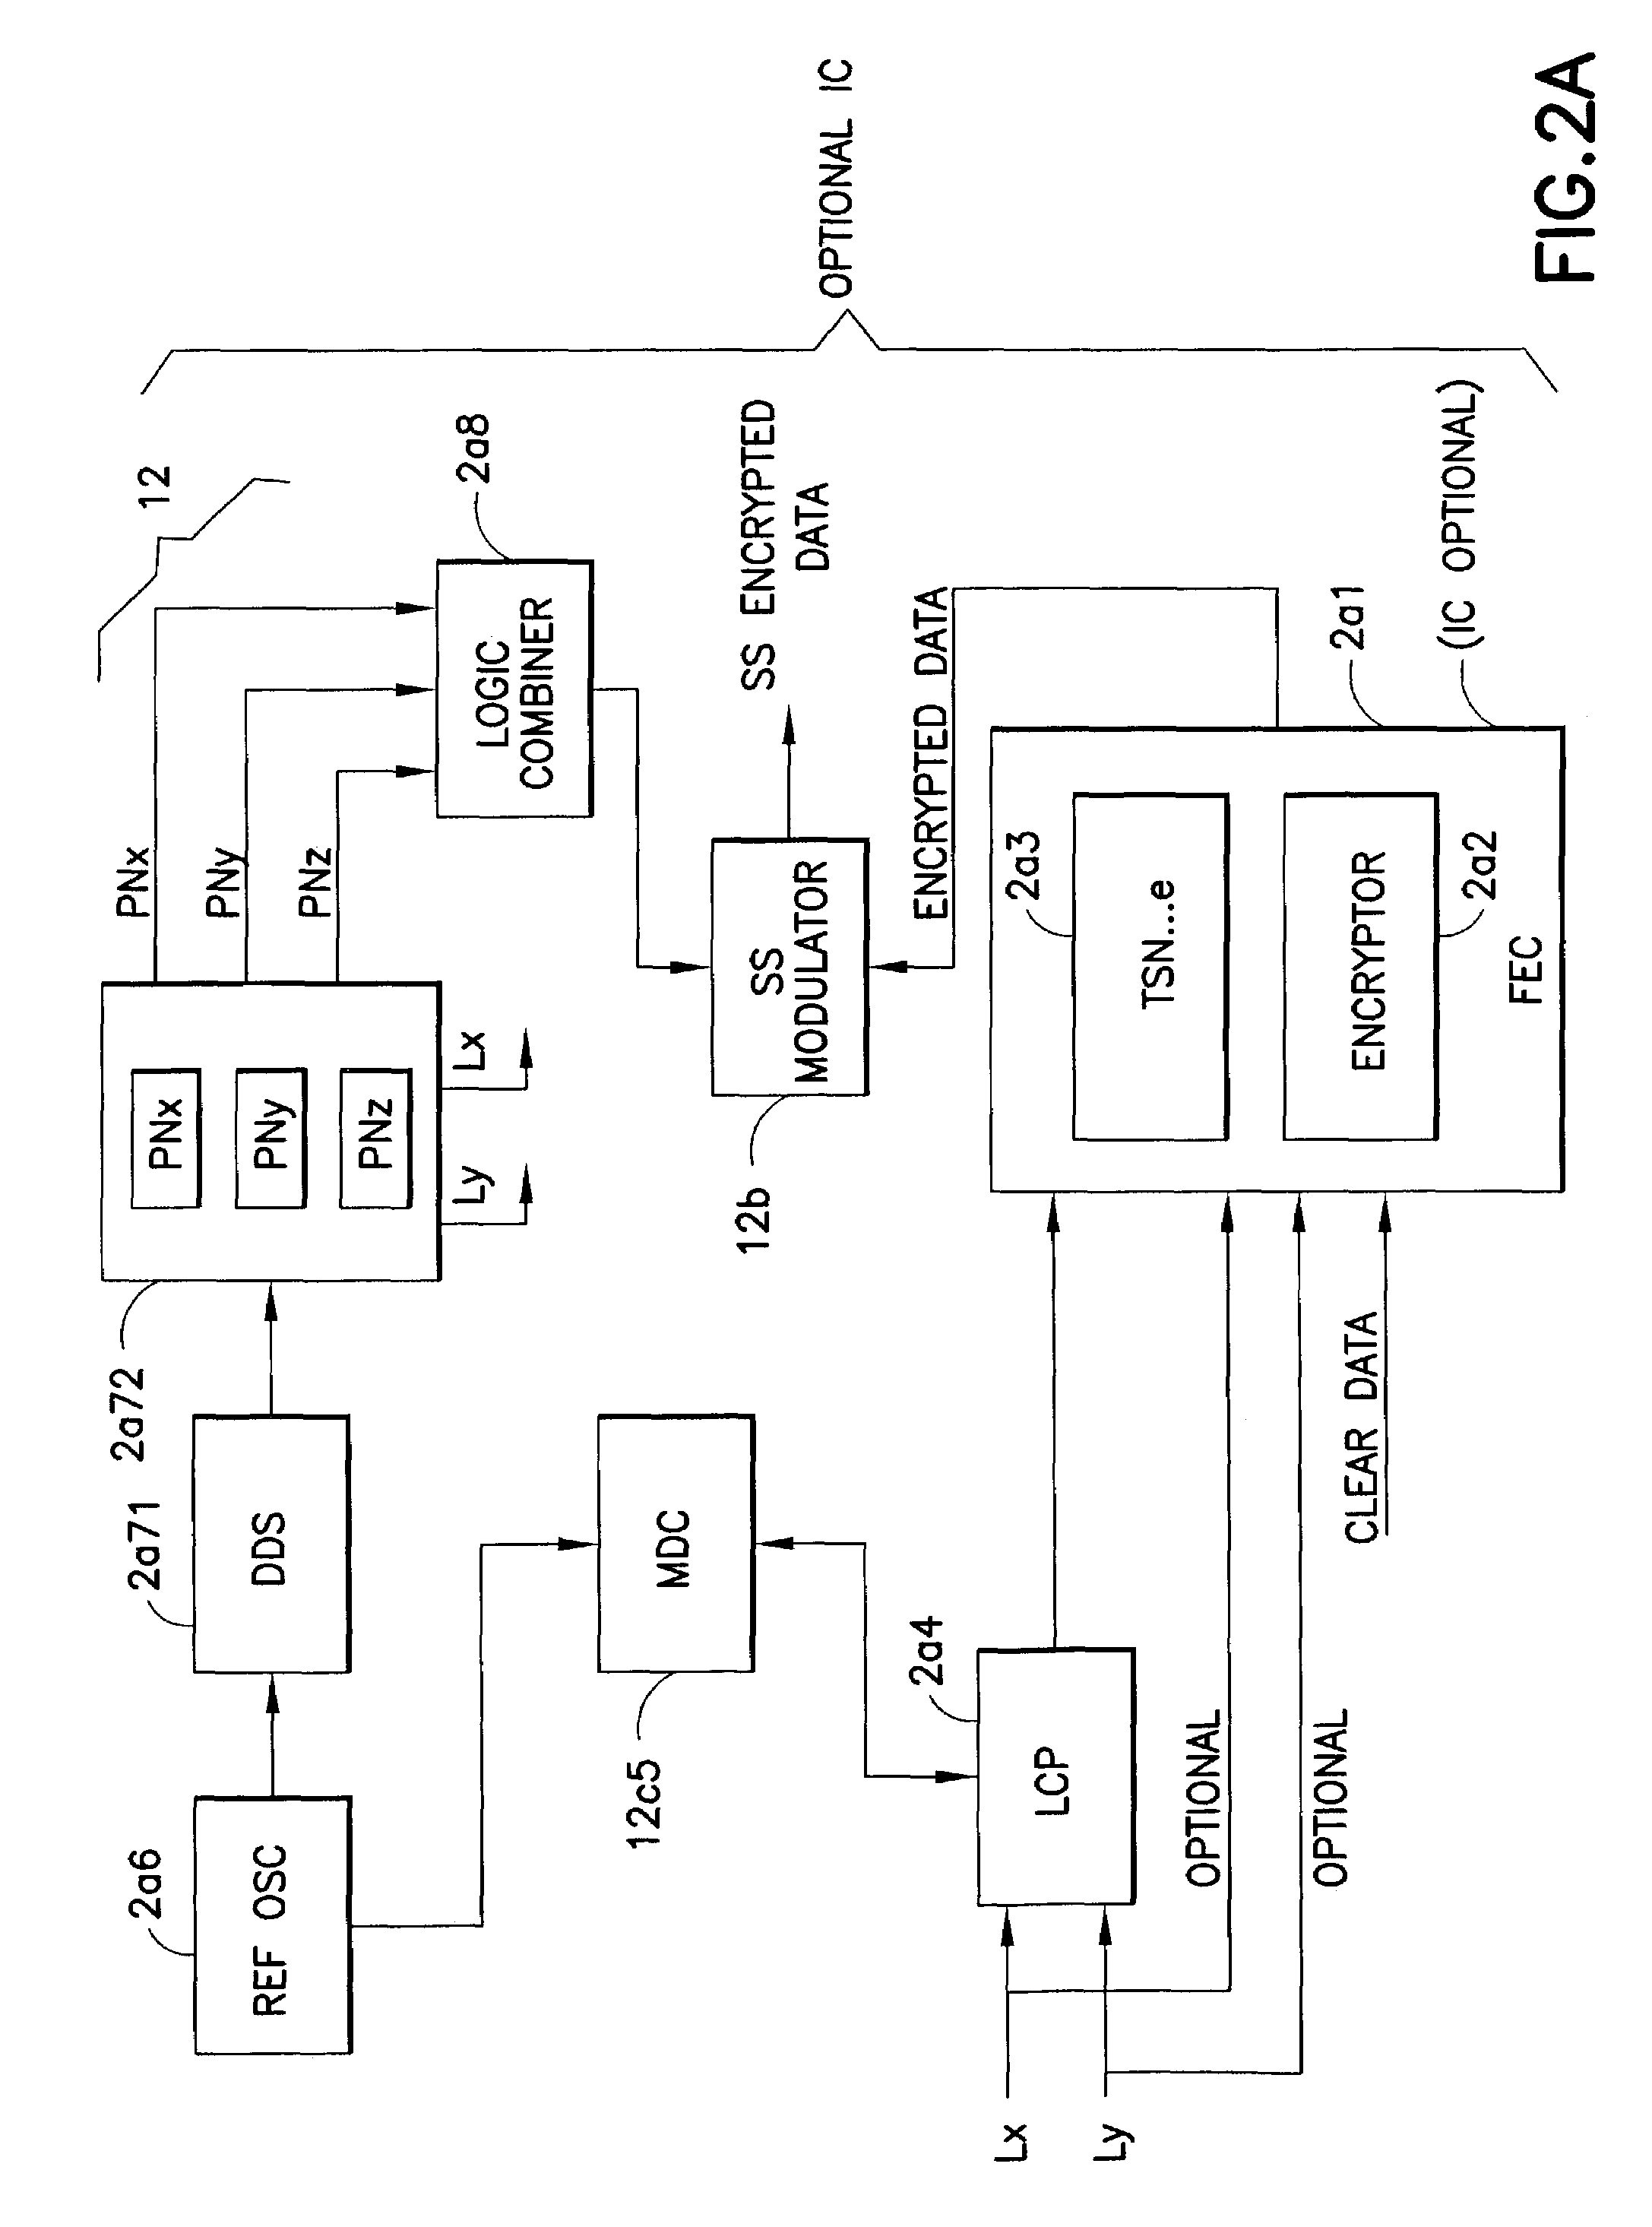 System and method for fast data encryption/decryption using time slot numbering